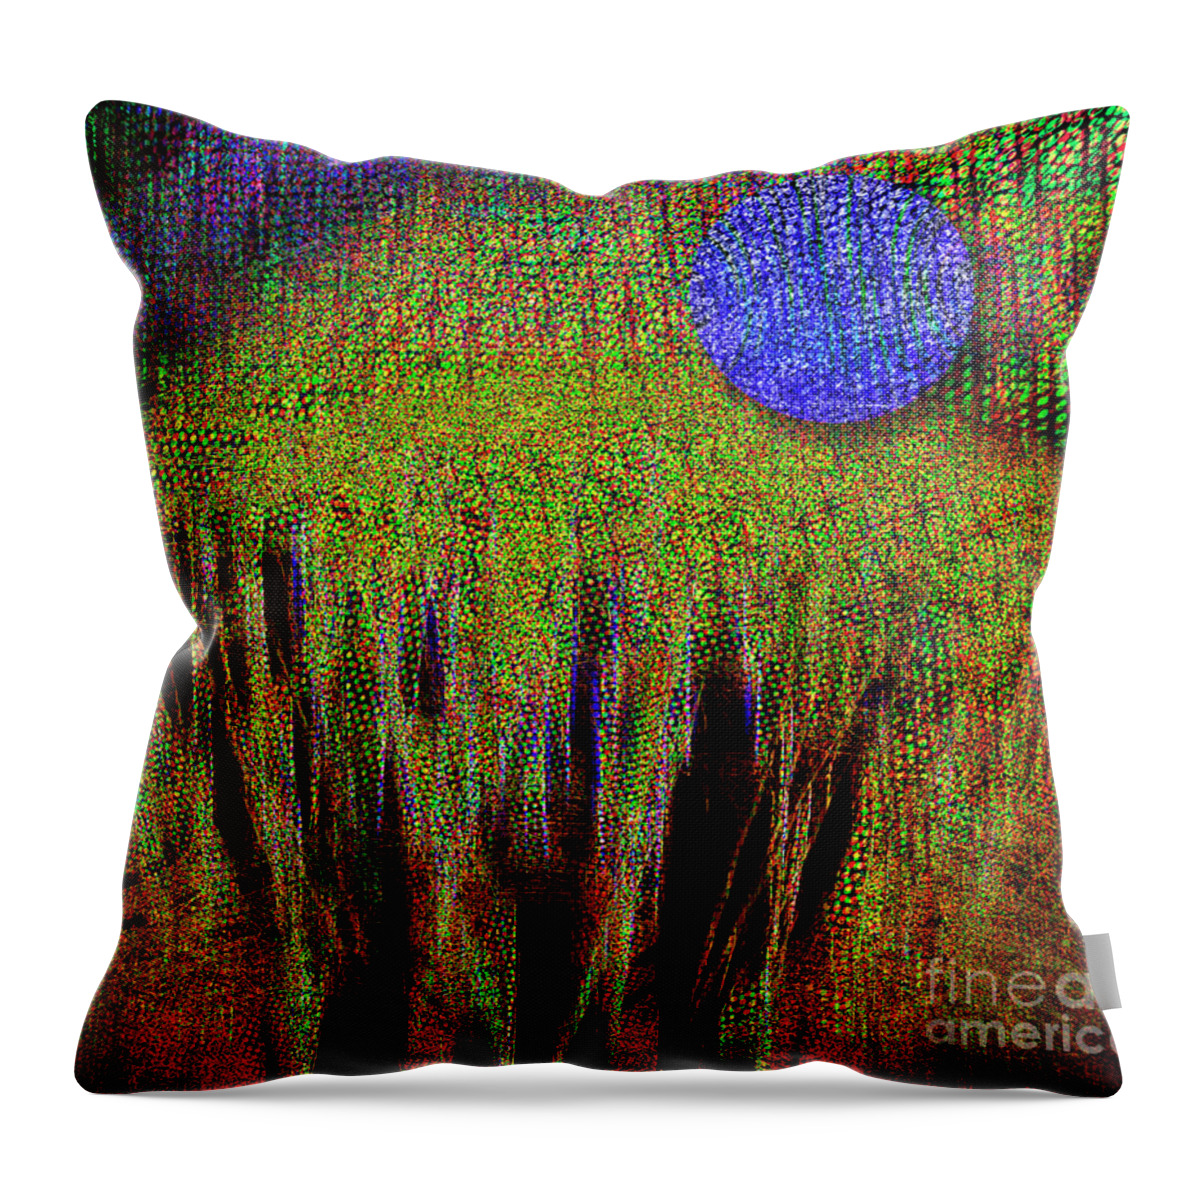 Nag004462 Throw Pillow featuring the digital art Once in a Blue Moon by Edmund Nagele FRPS